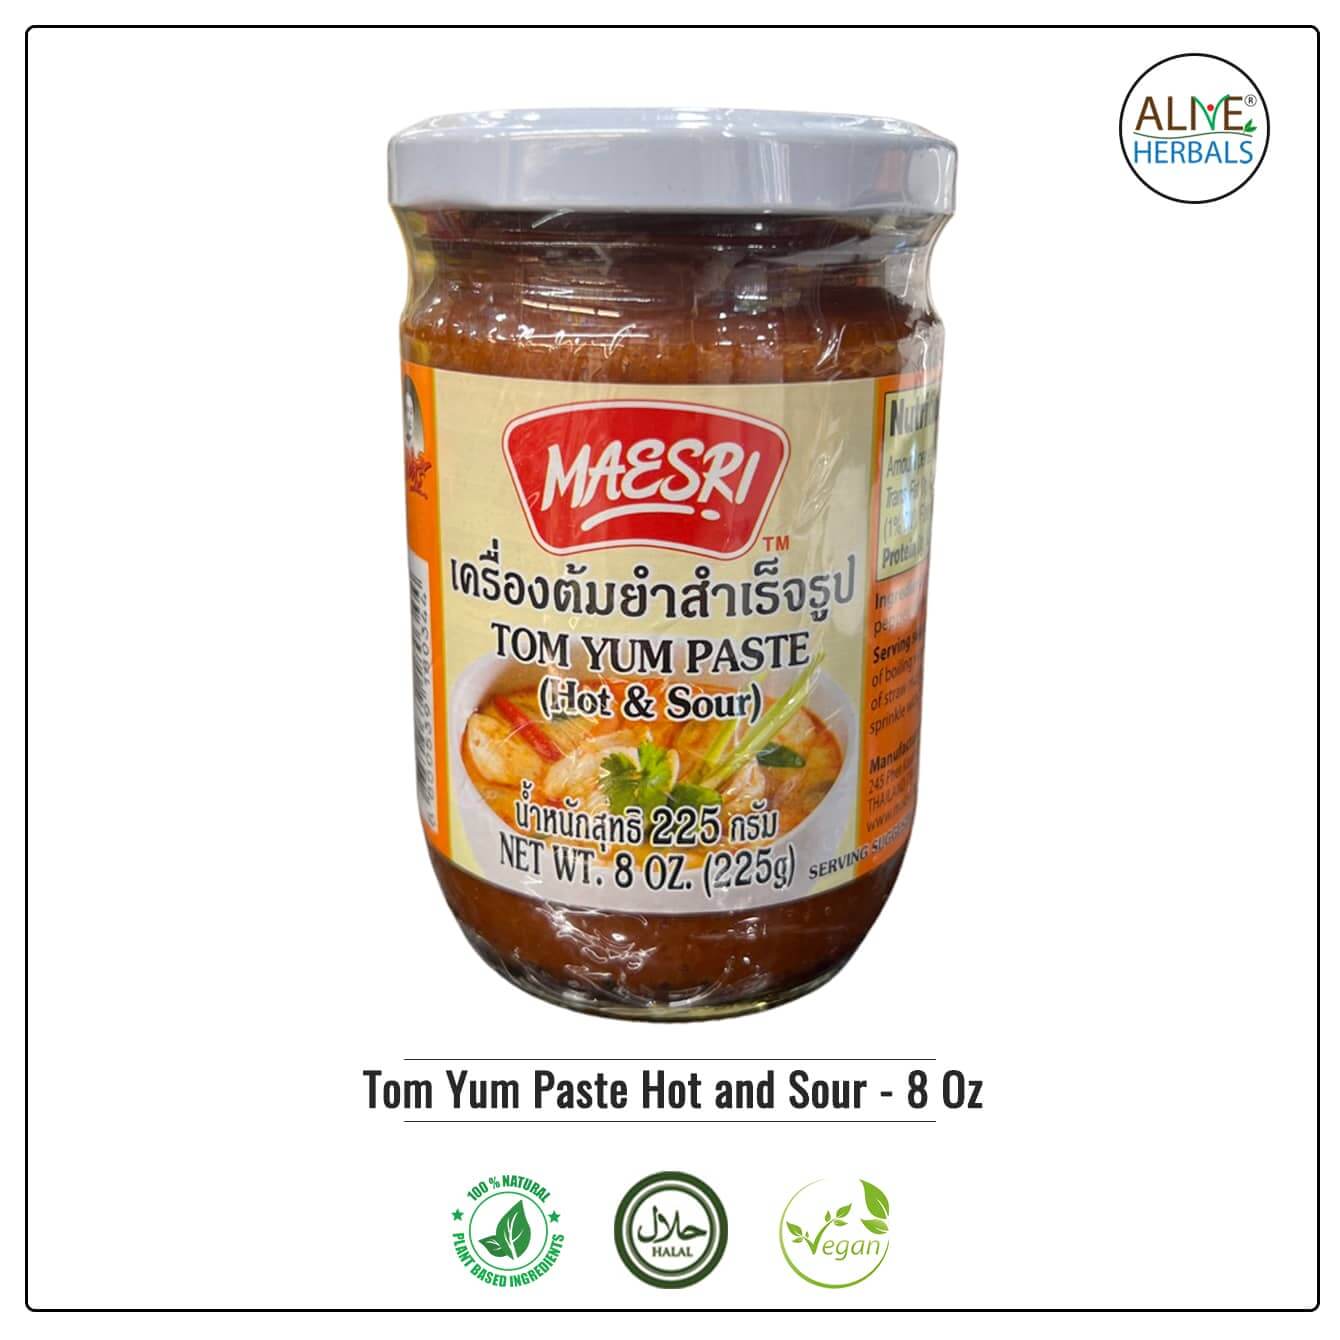 Tom Yum Paste Hot and Sour